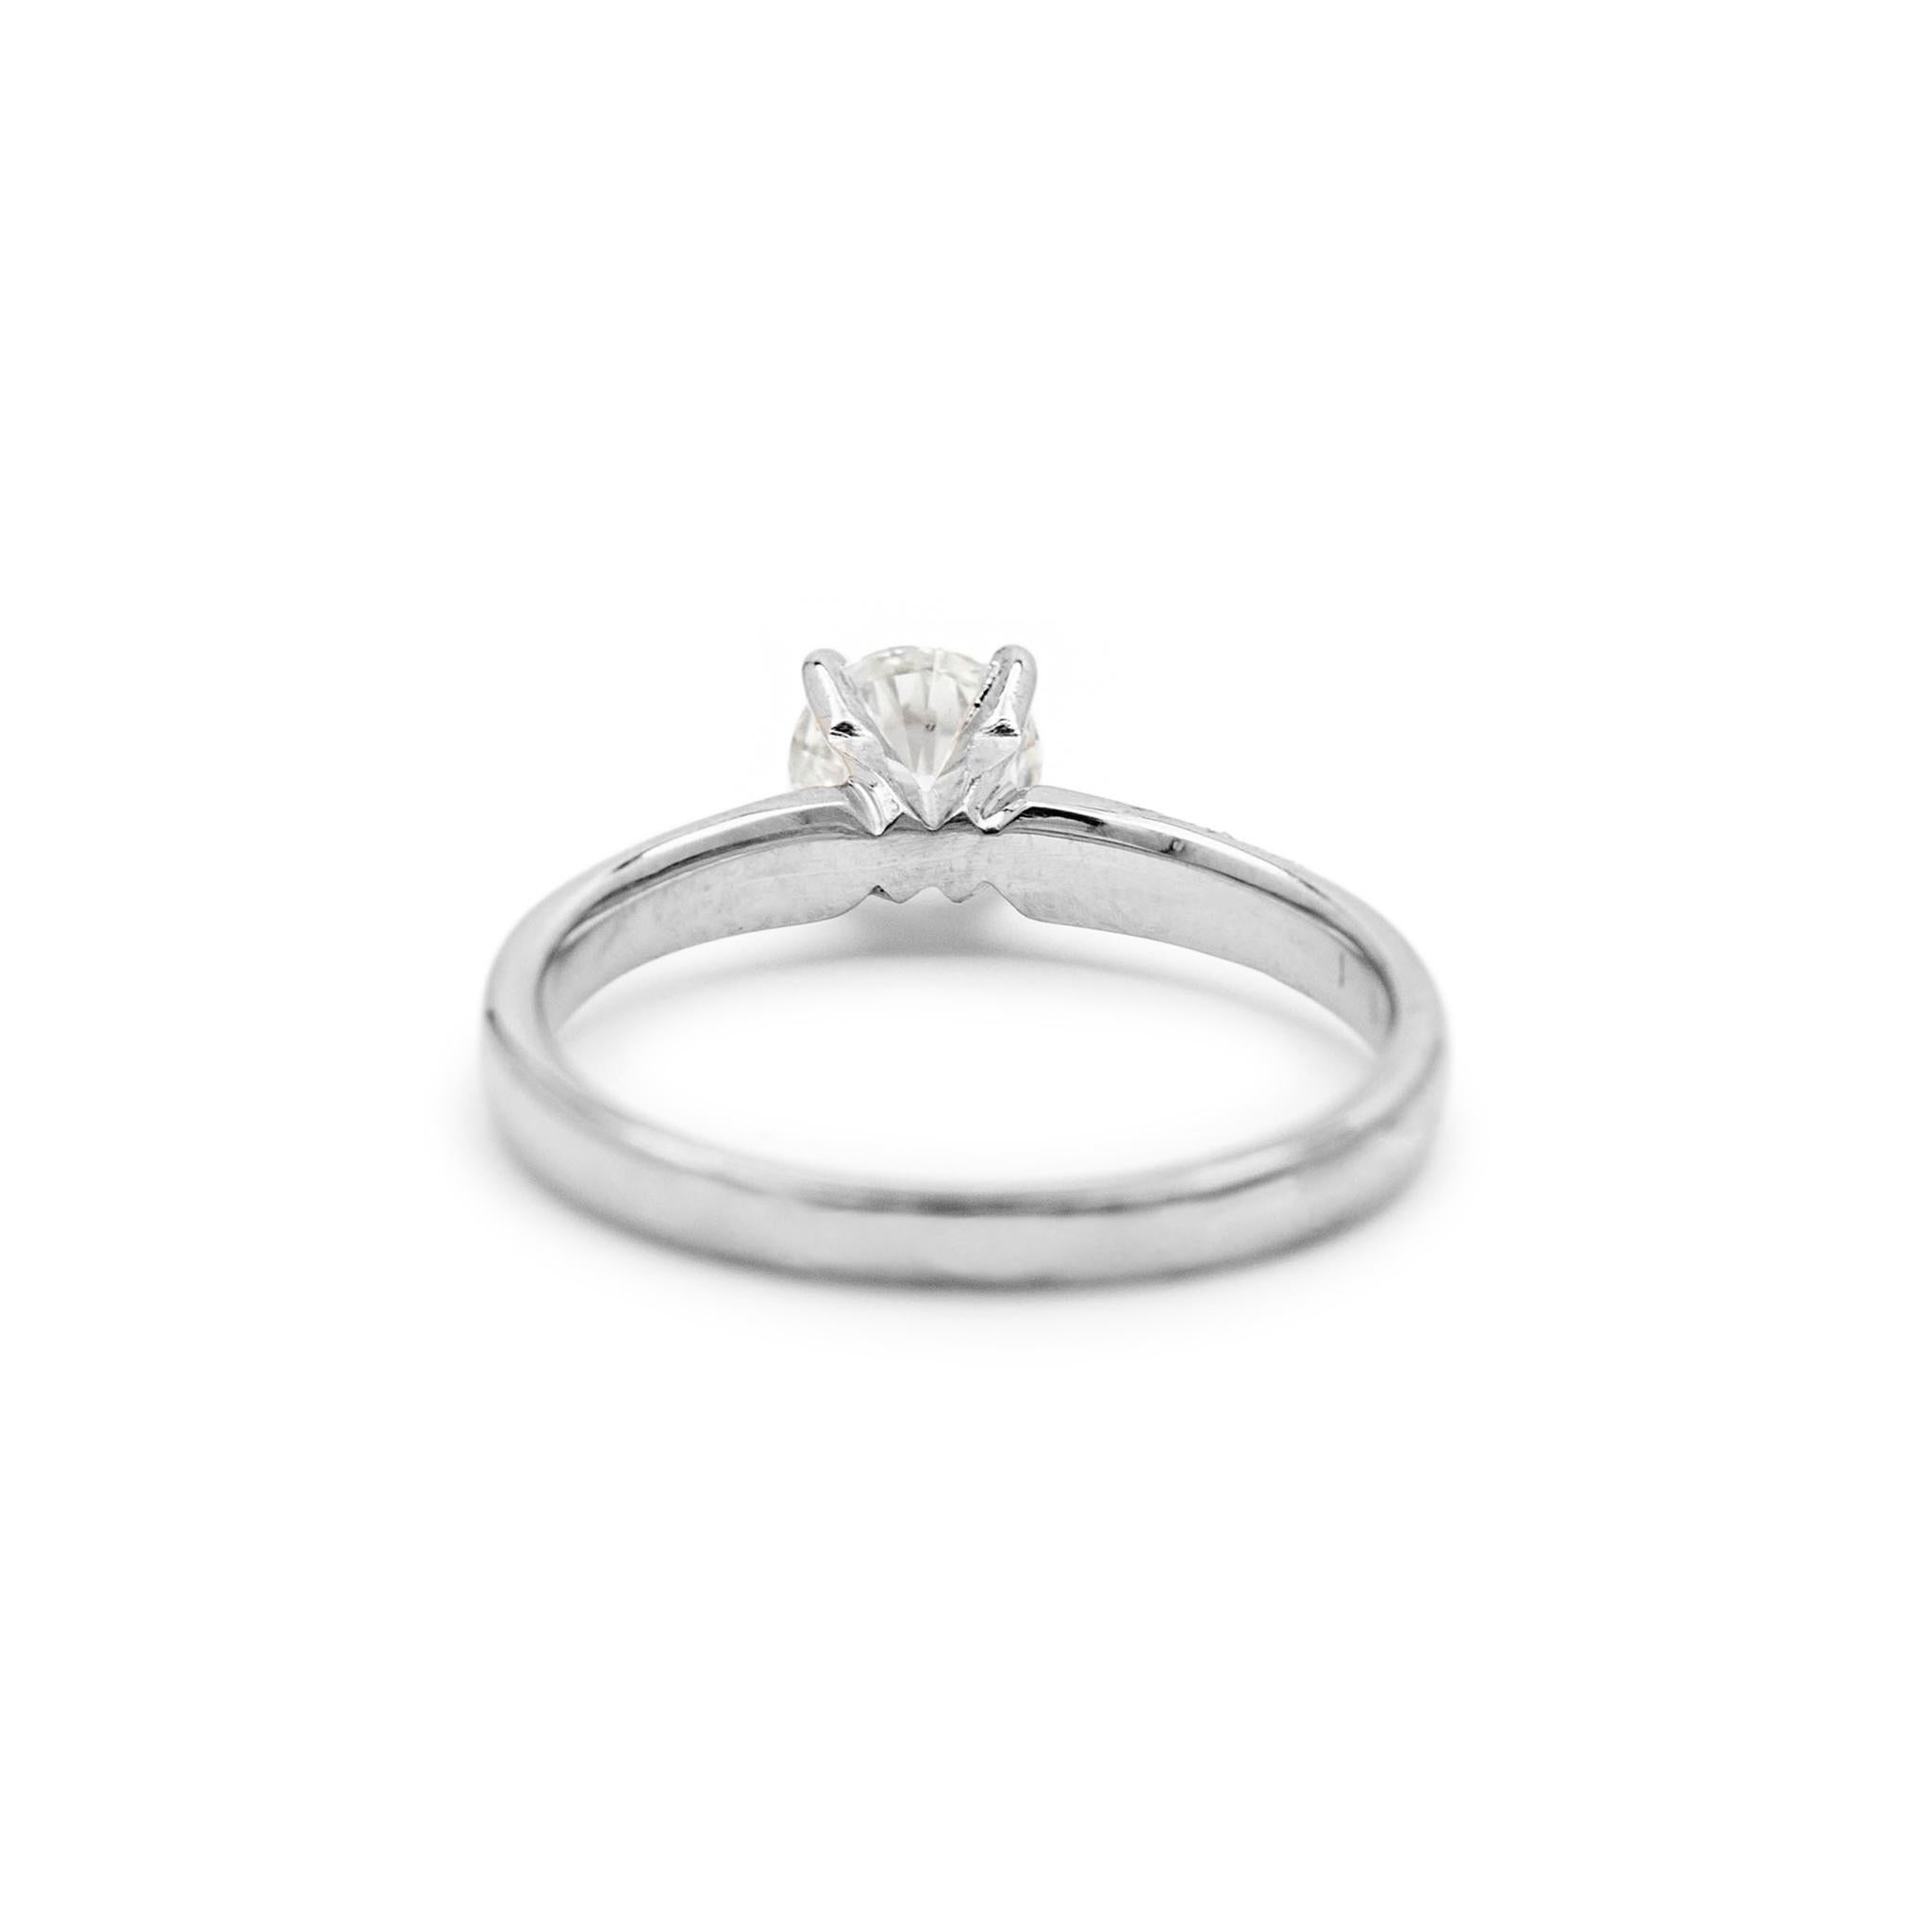 Ladies 14K White Gold Solitaire Diamond Engagement Ring In Excellent Condition For Sale In Houston, TX